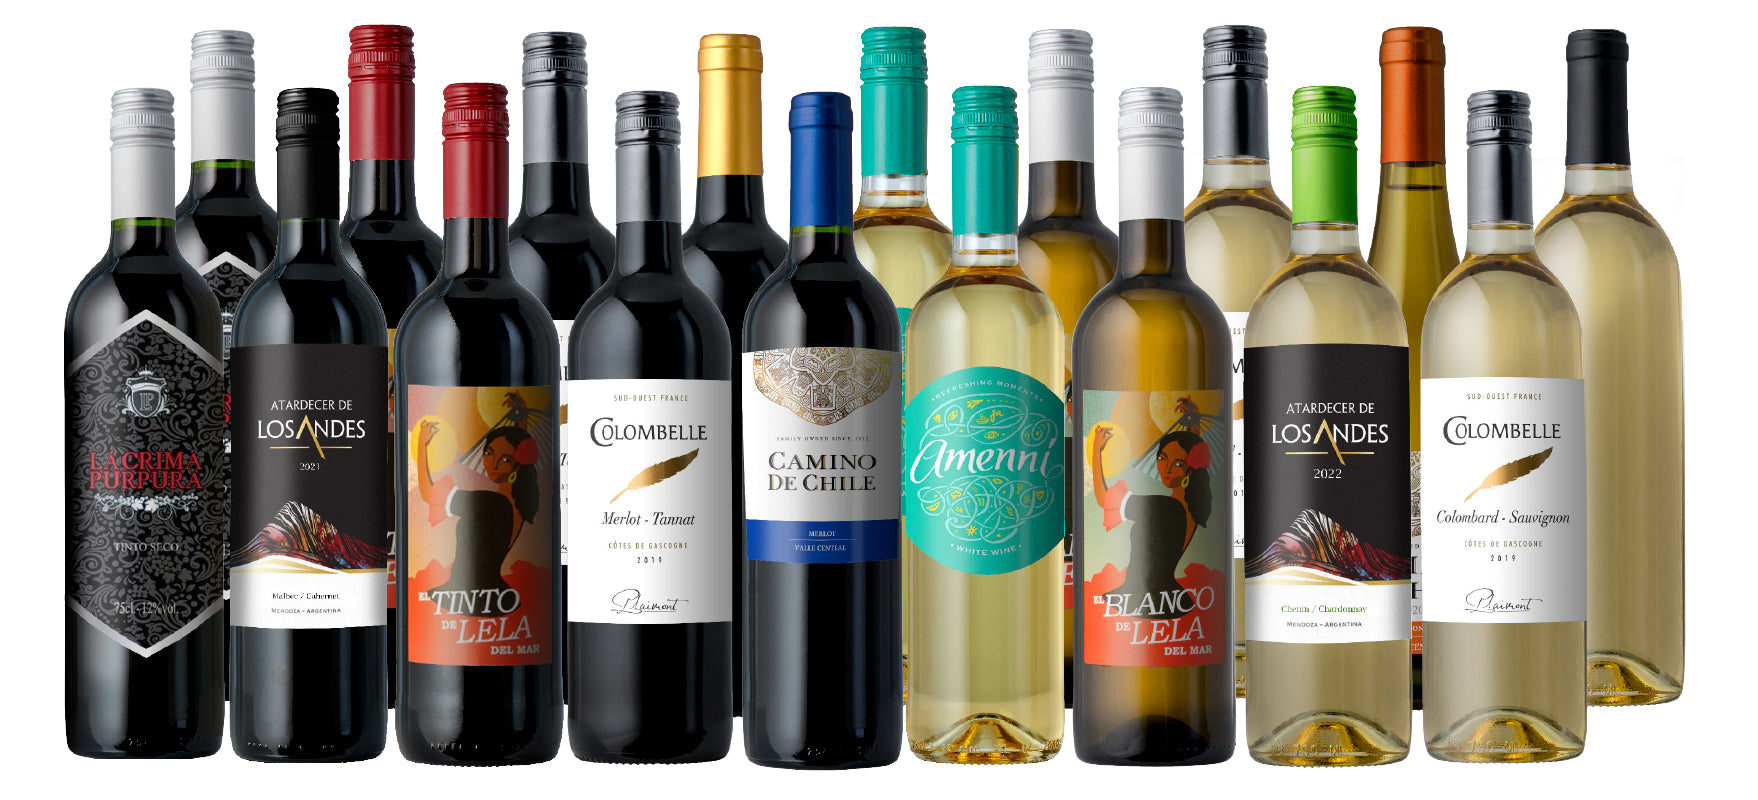 $5.55 Wines - 25,000 5-Star Reviews Celebration 18-Pack!